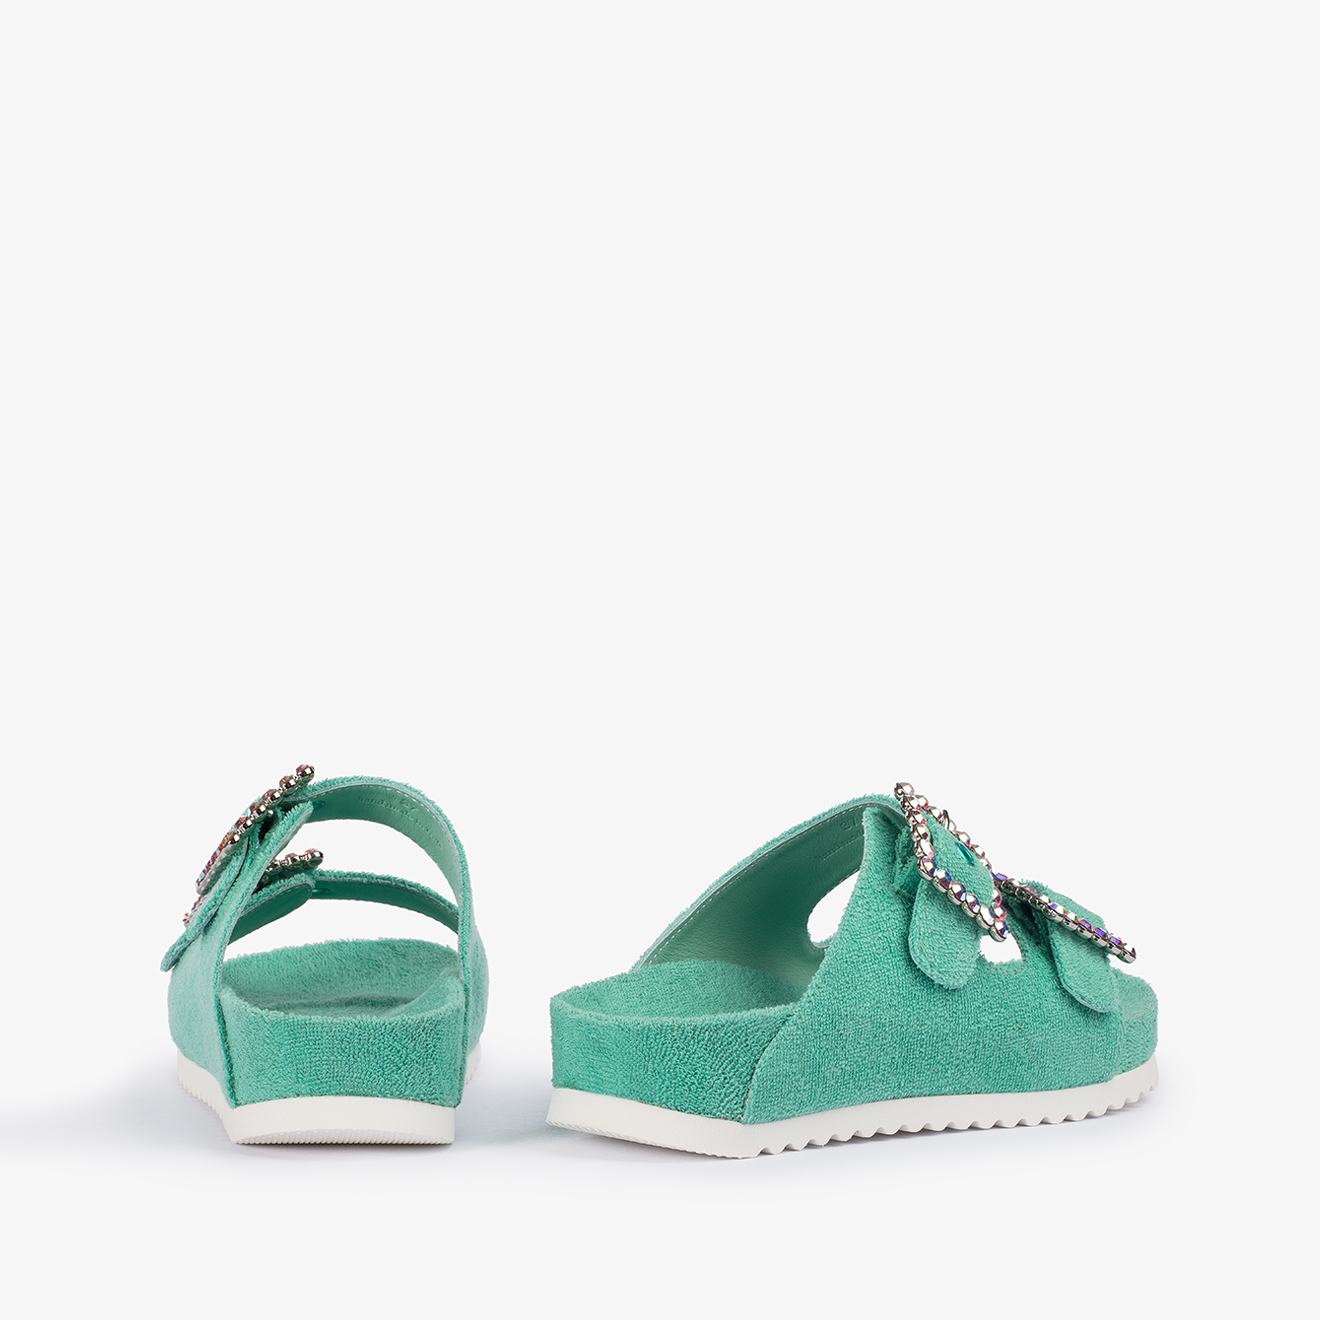 POOLSIDE SLIPPER - Le Silla official outlet